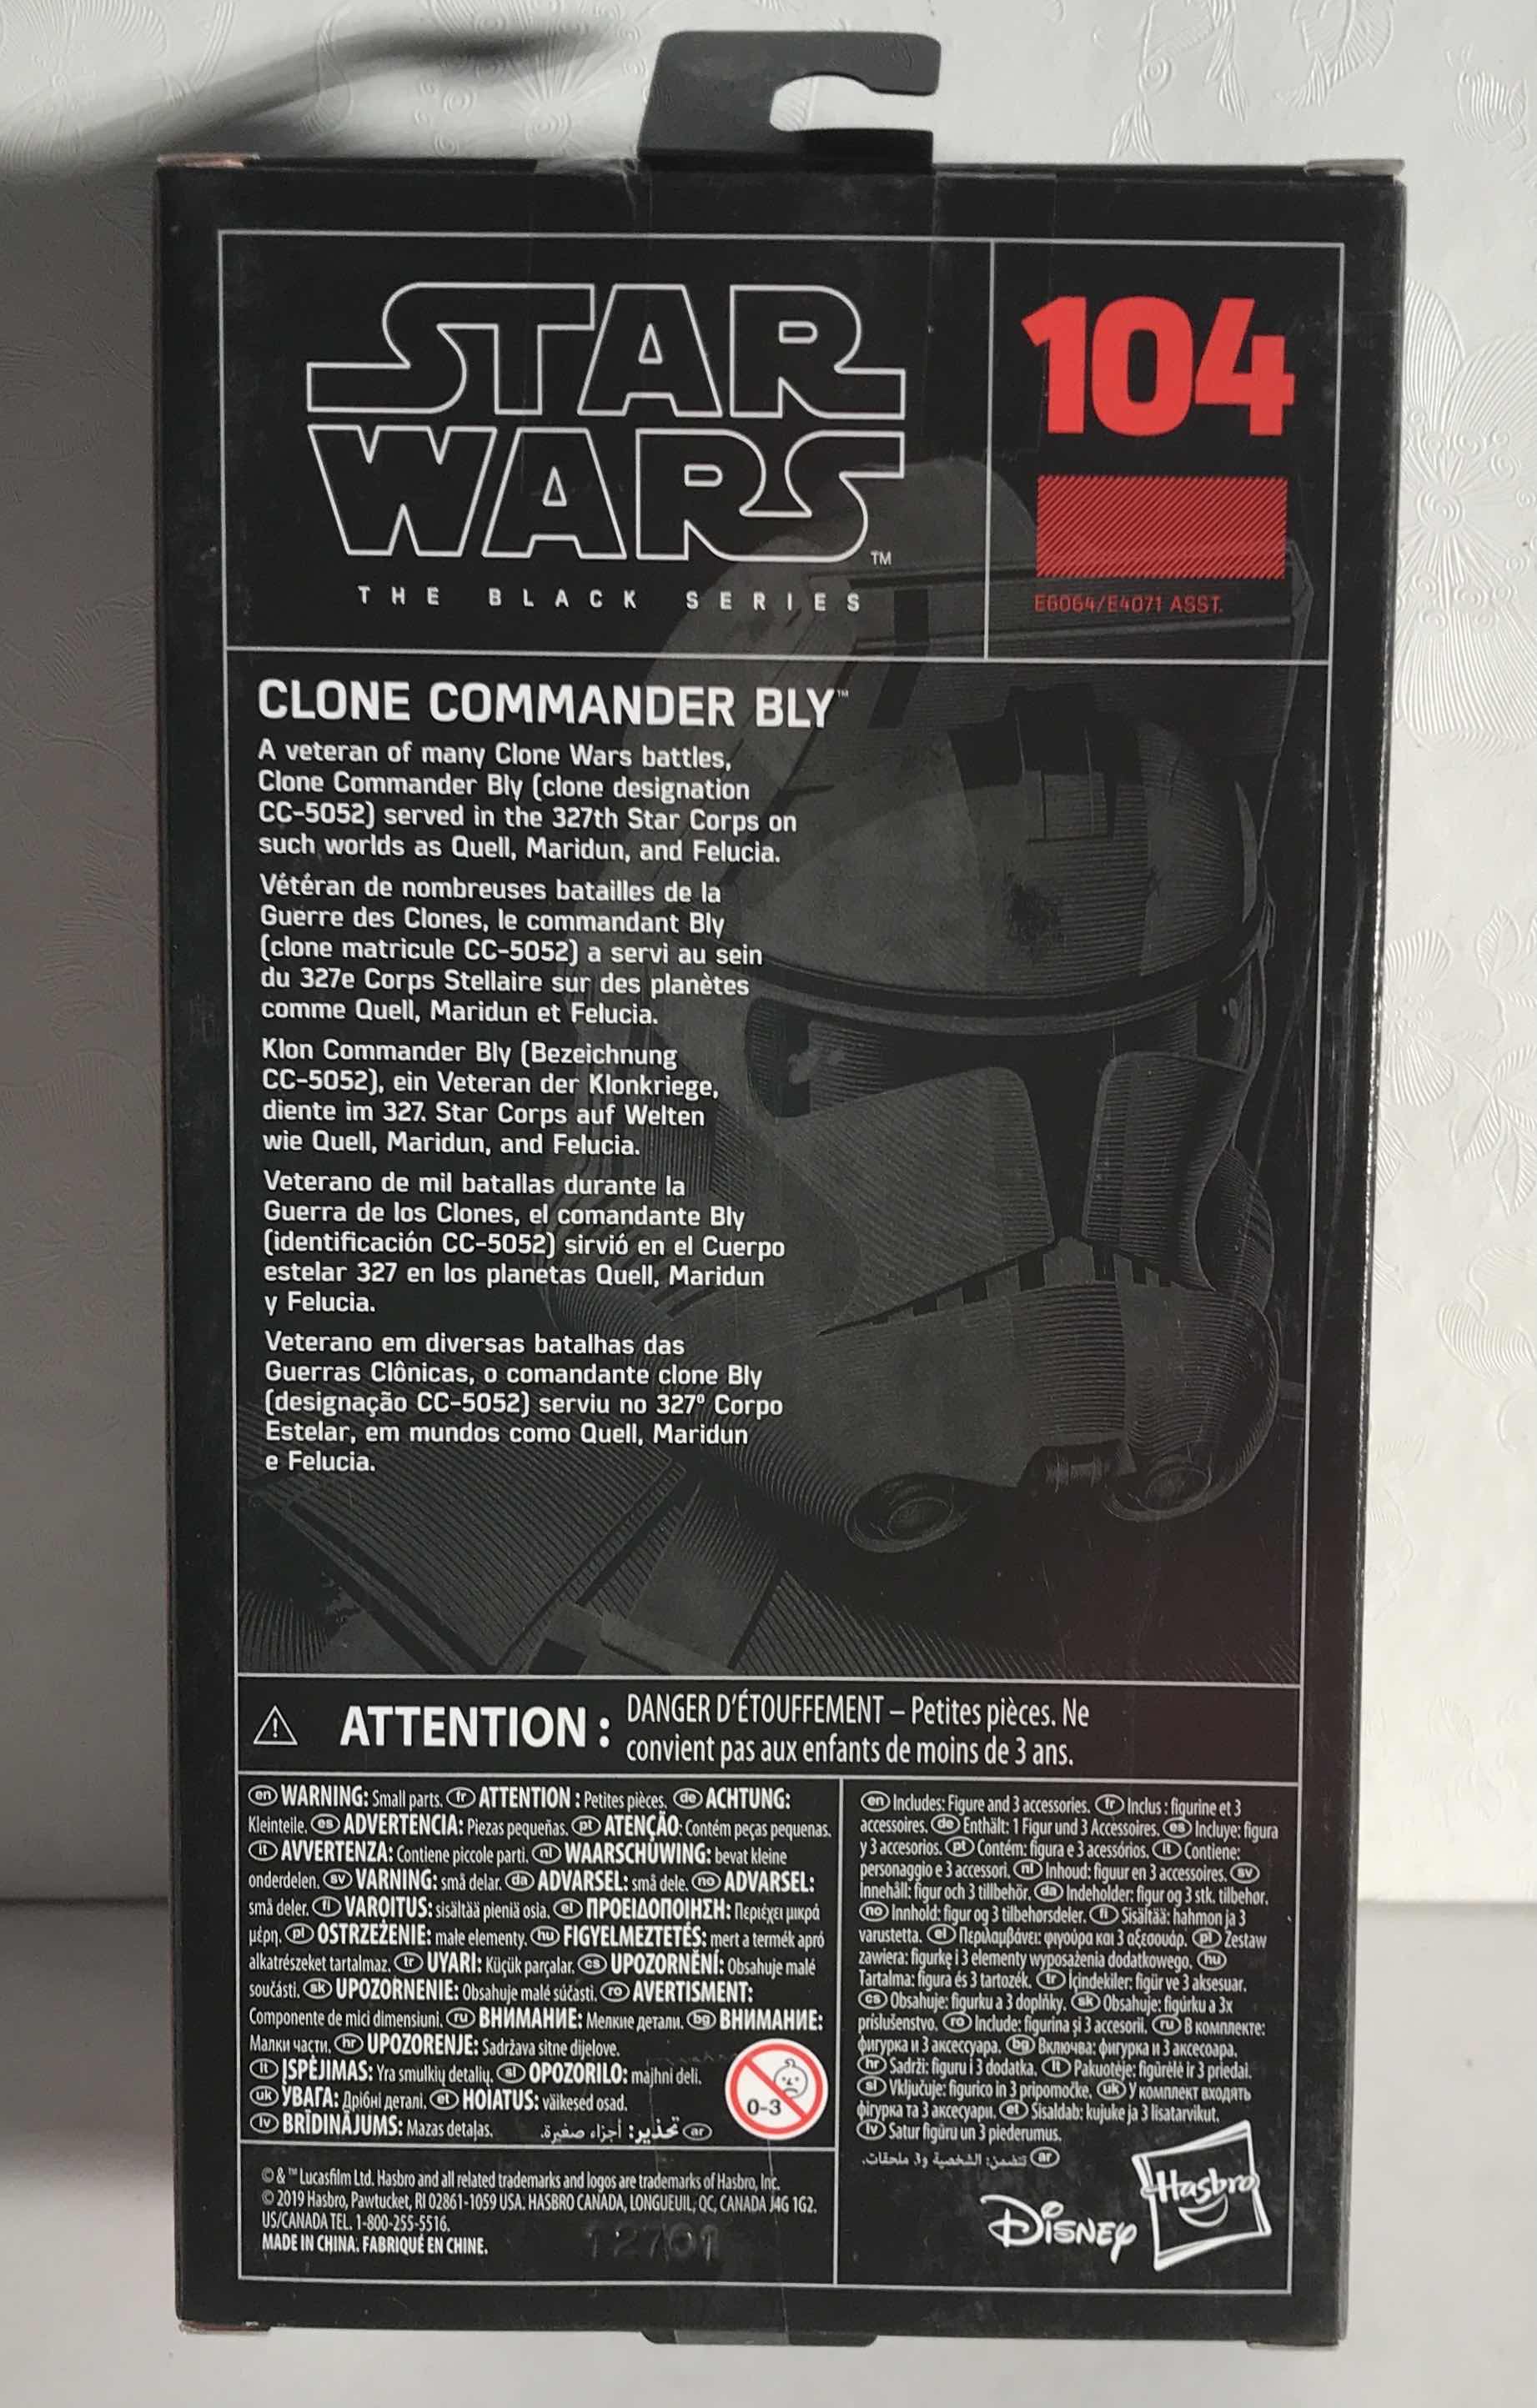 Photo 2 of NIB STAR WARS THE BLACK SERIES “CLONE COMMANDER BLY” ACTION FIGURE- RETAIL PRICE $32.00